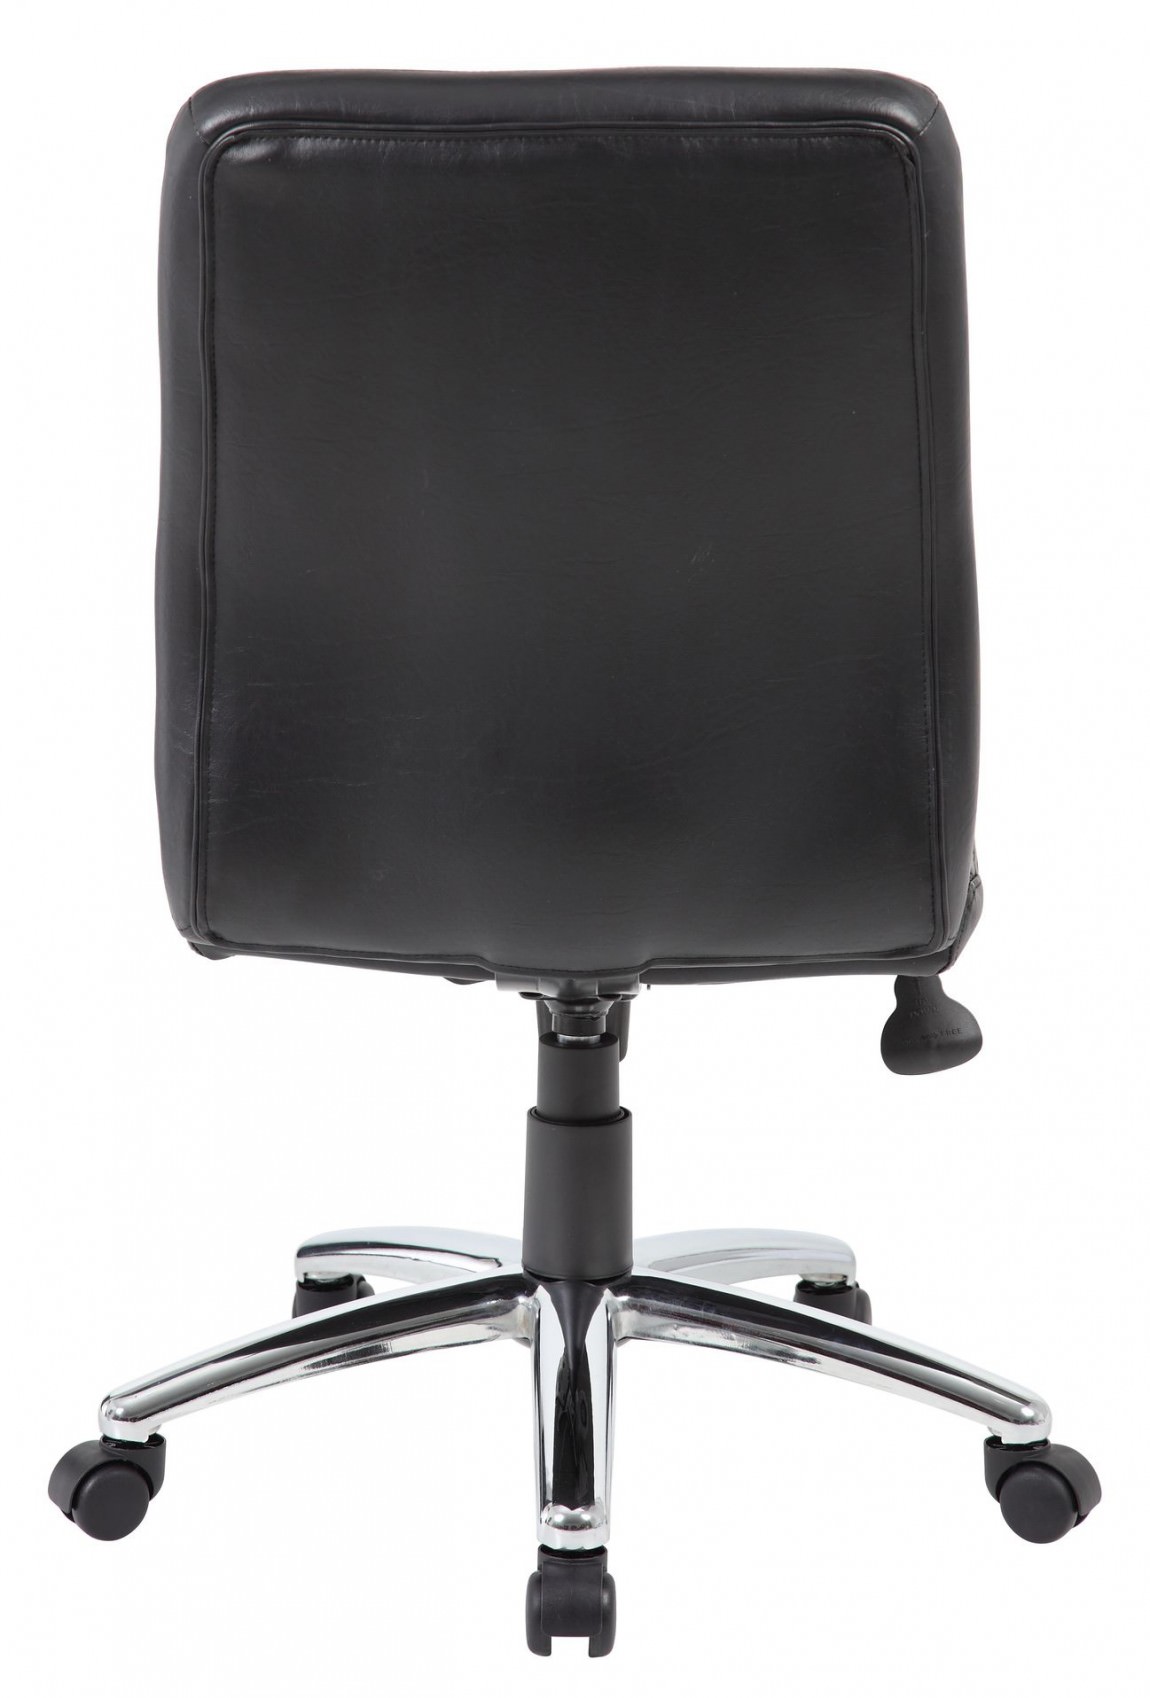 Mid Back Conference Chair without Arms